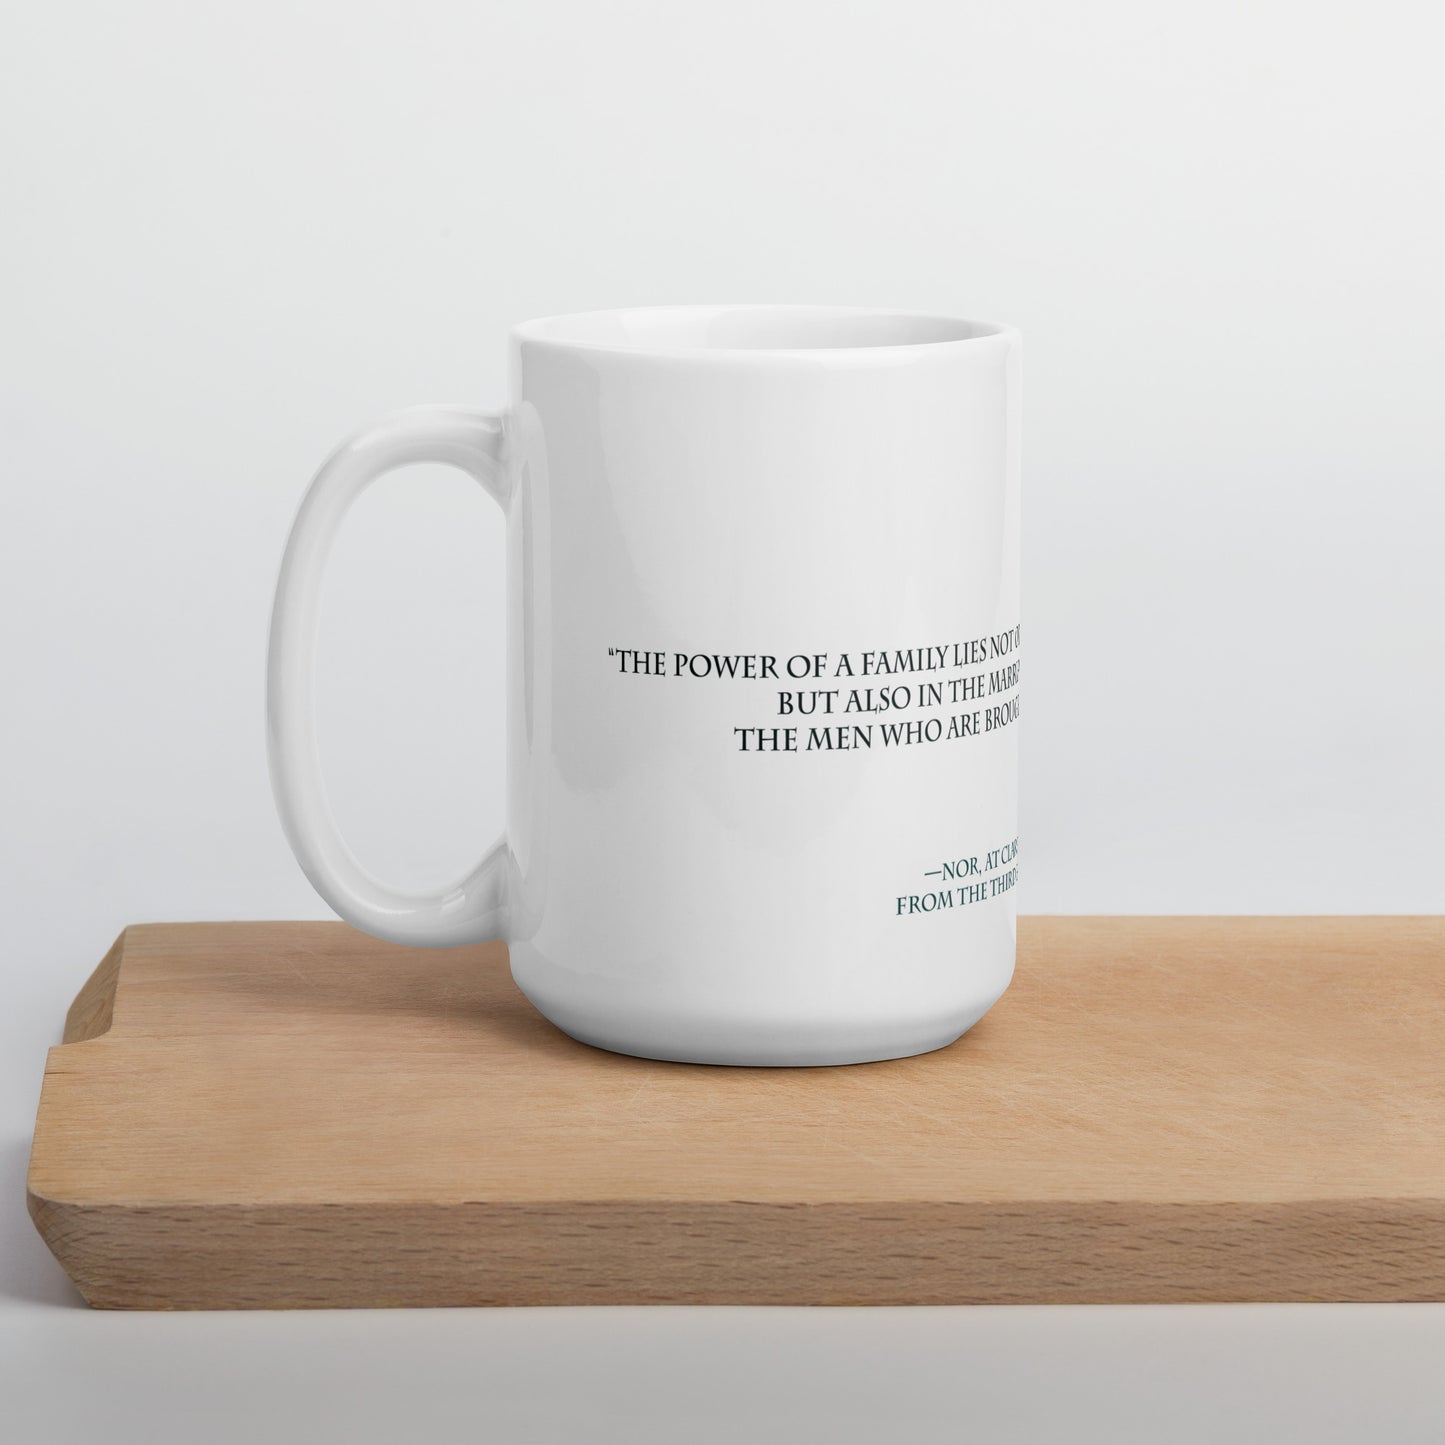 Nor's 'Power of a family' quote on mug